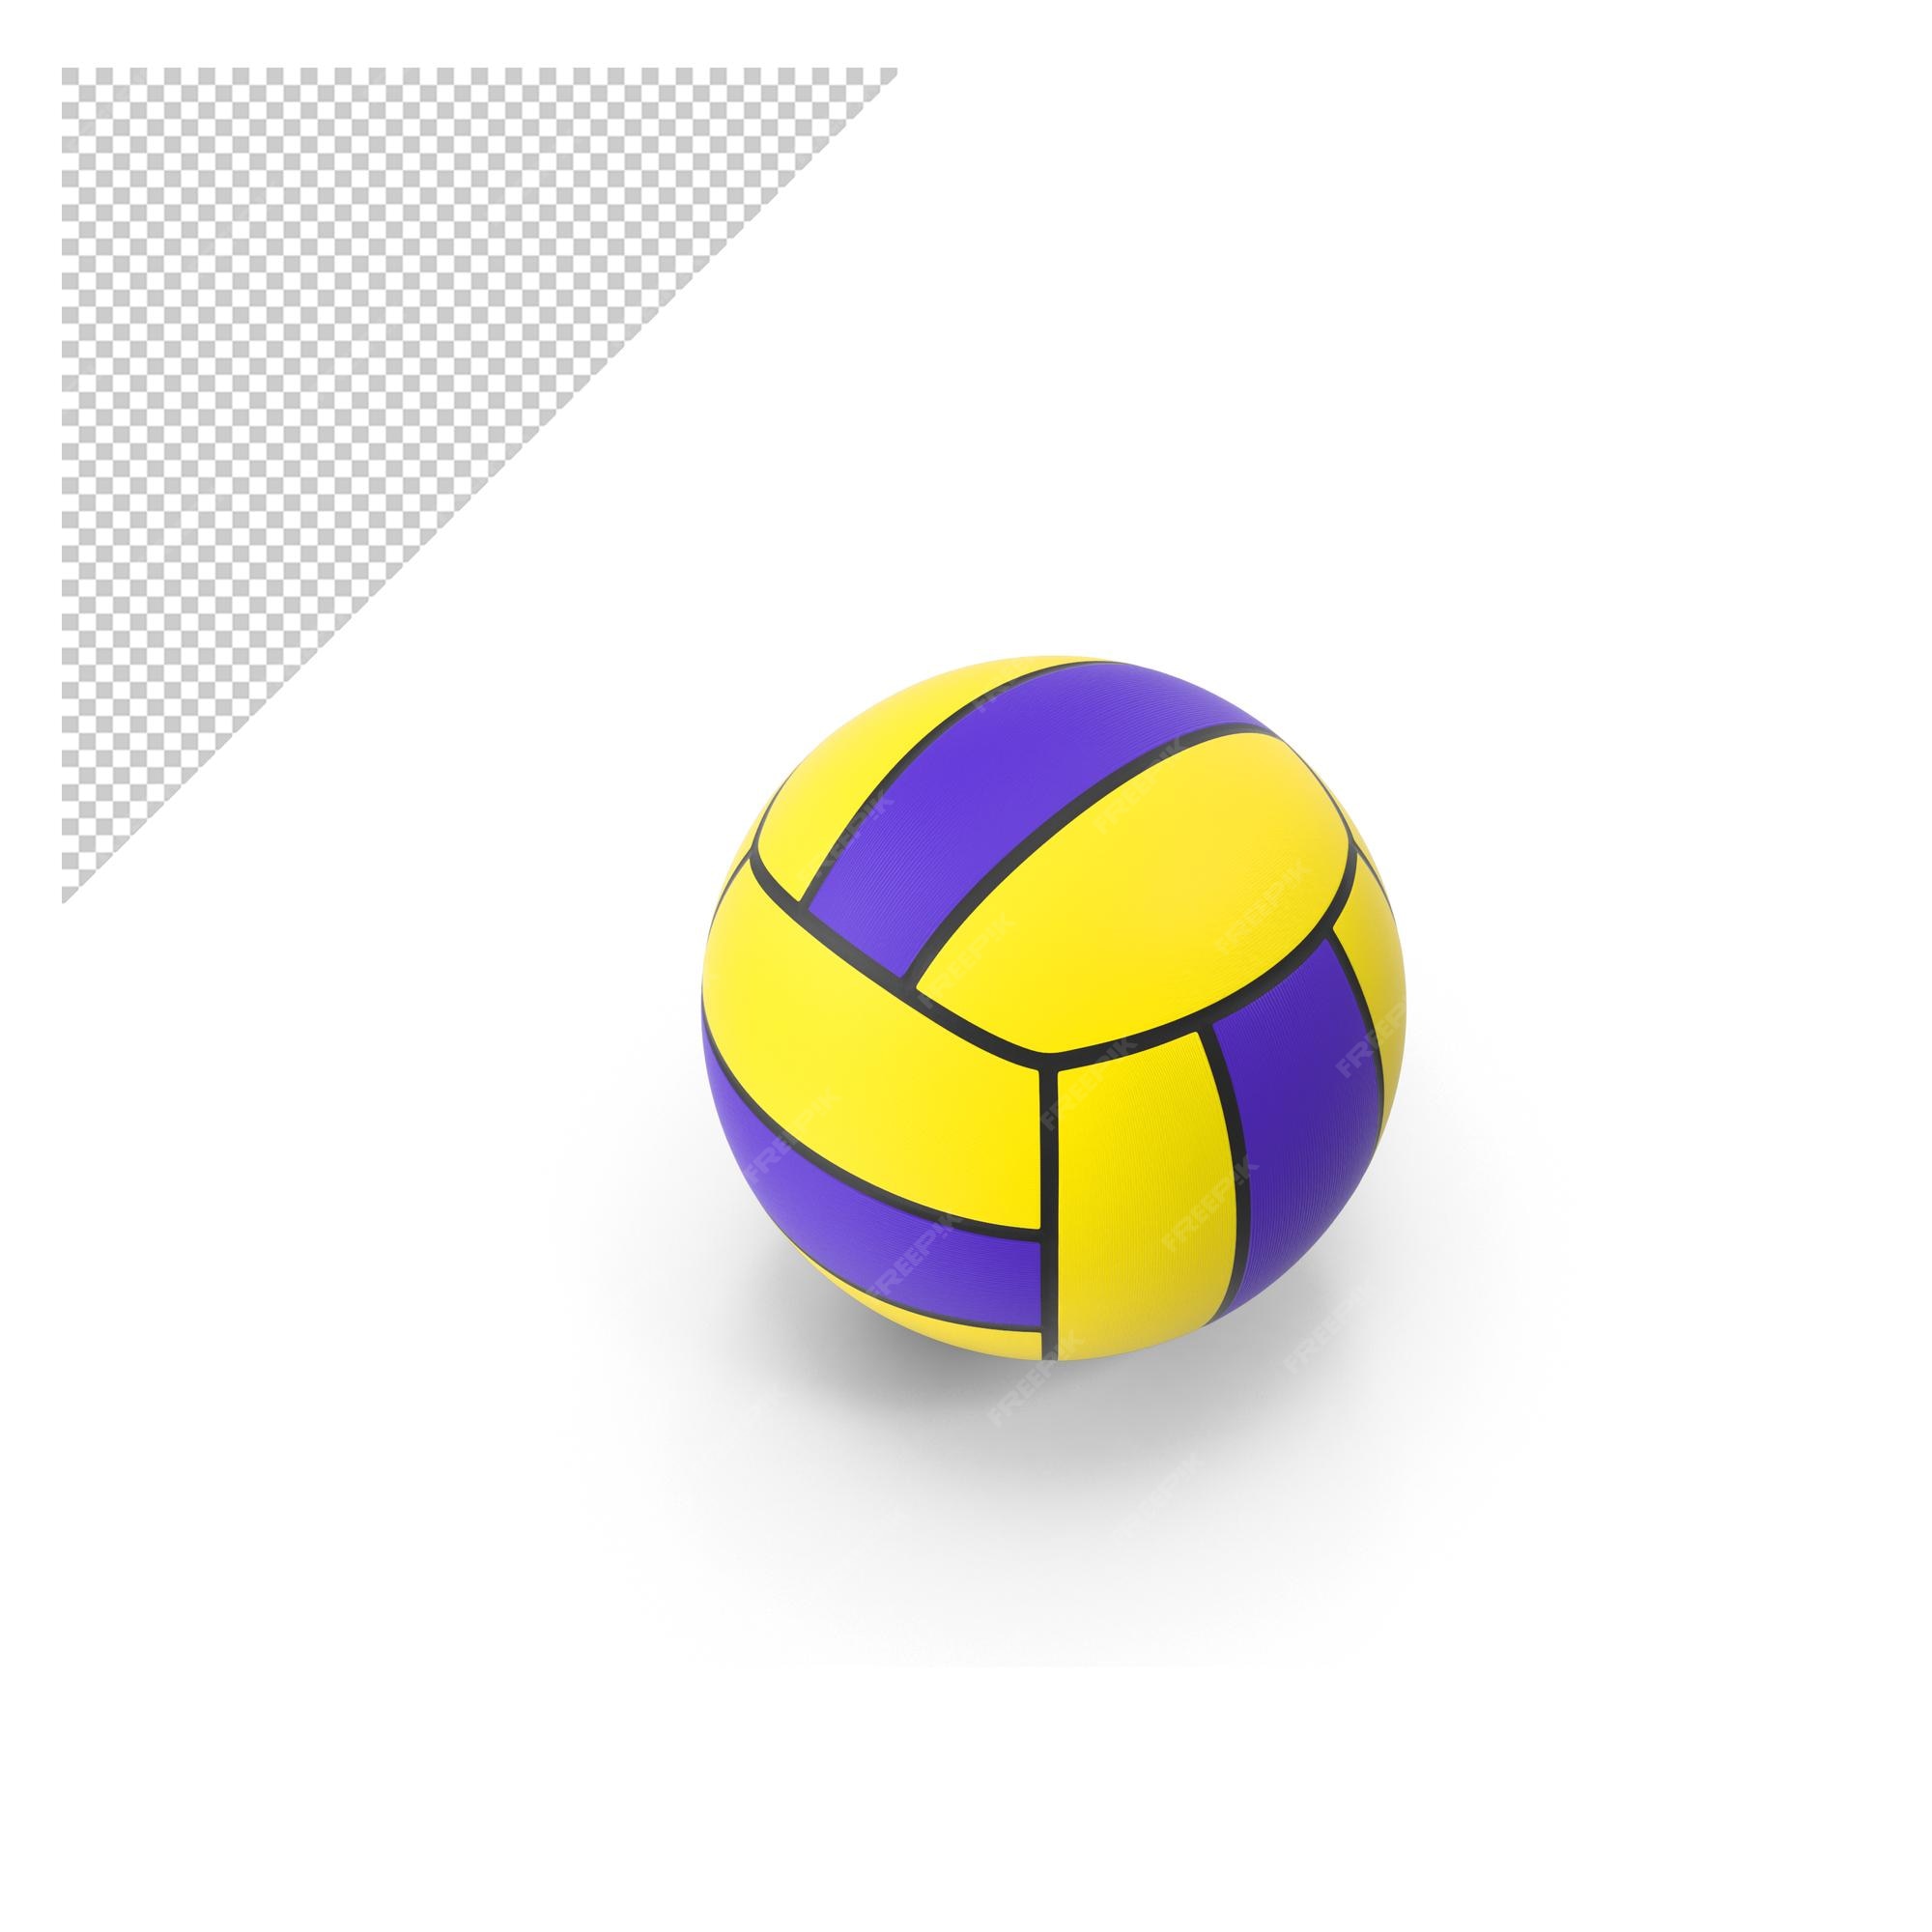 Premium psd water polo ball png